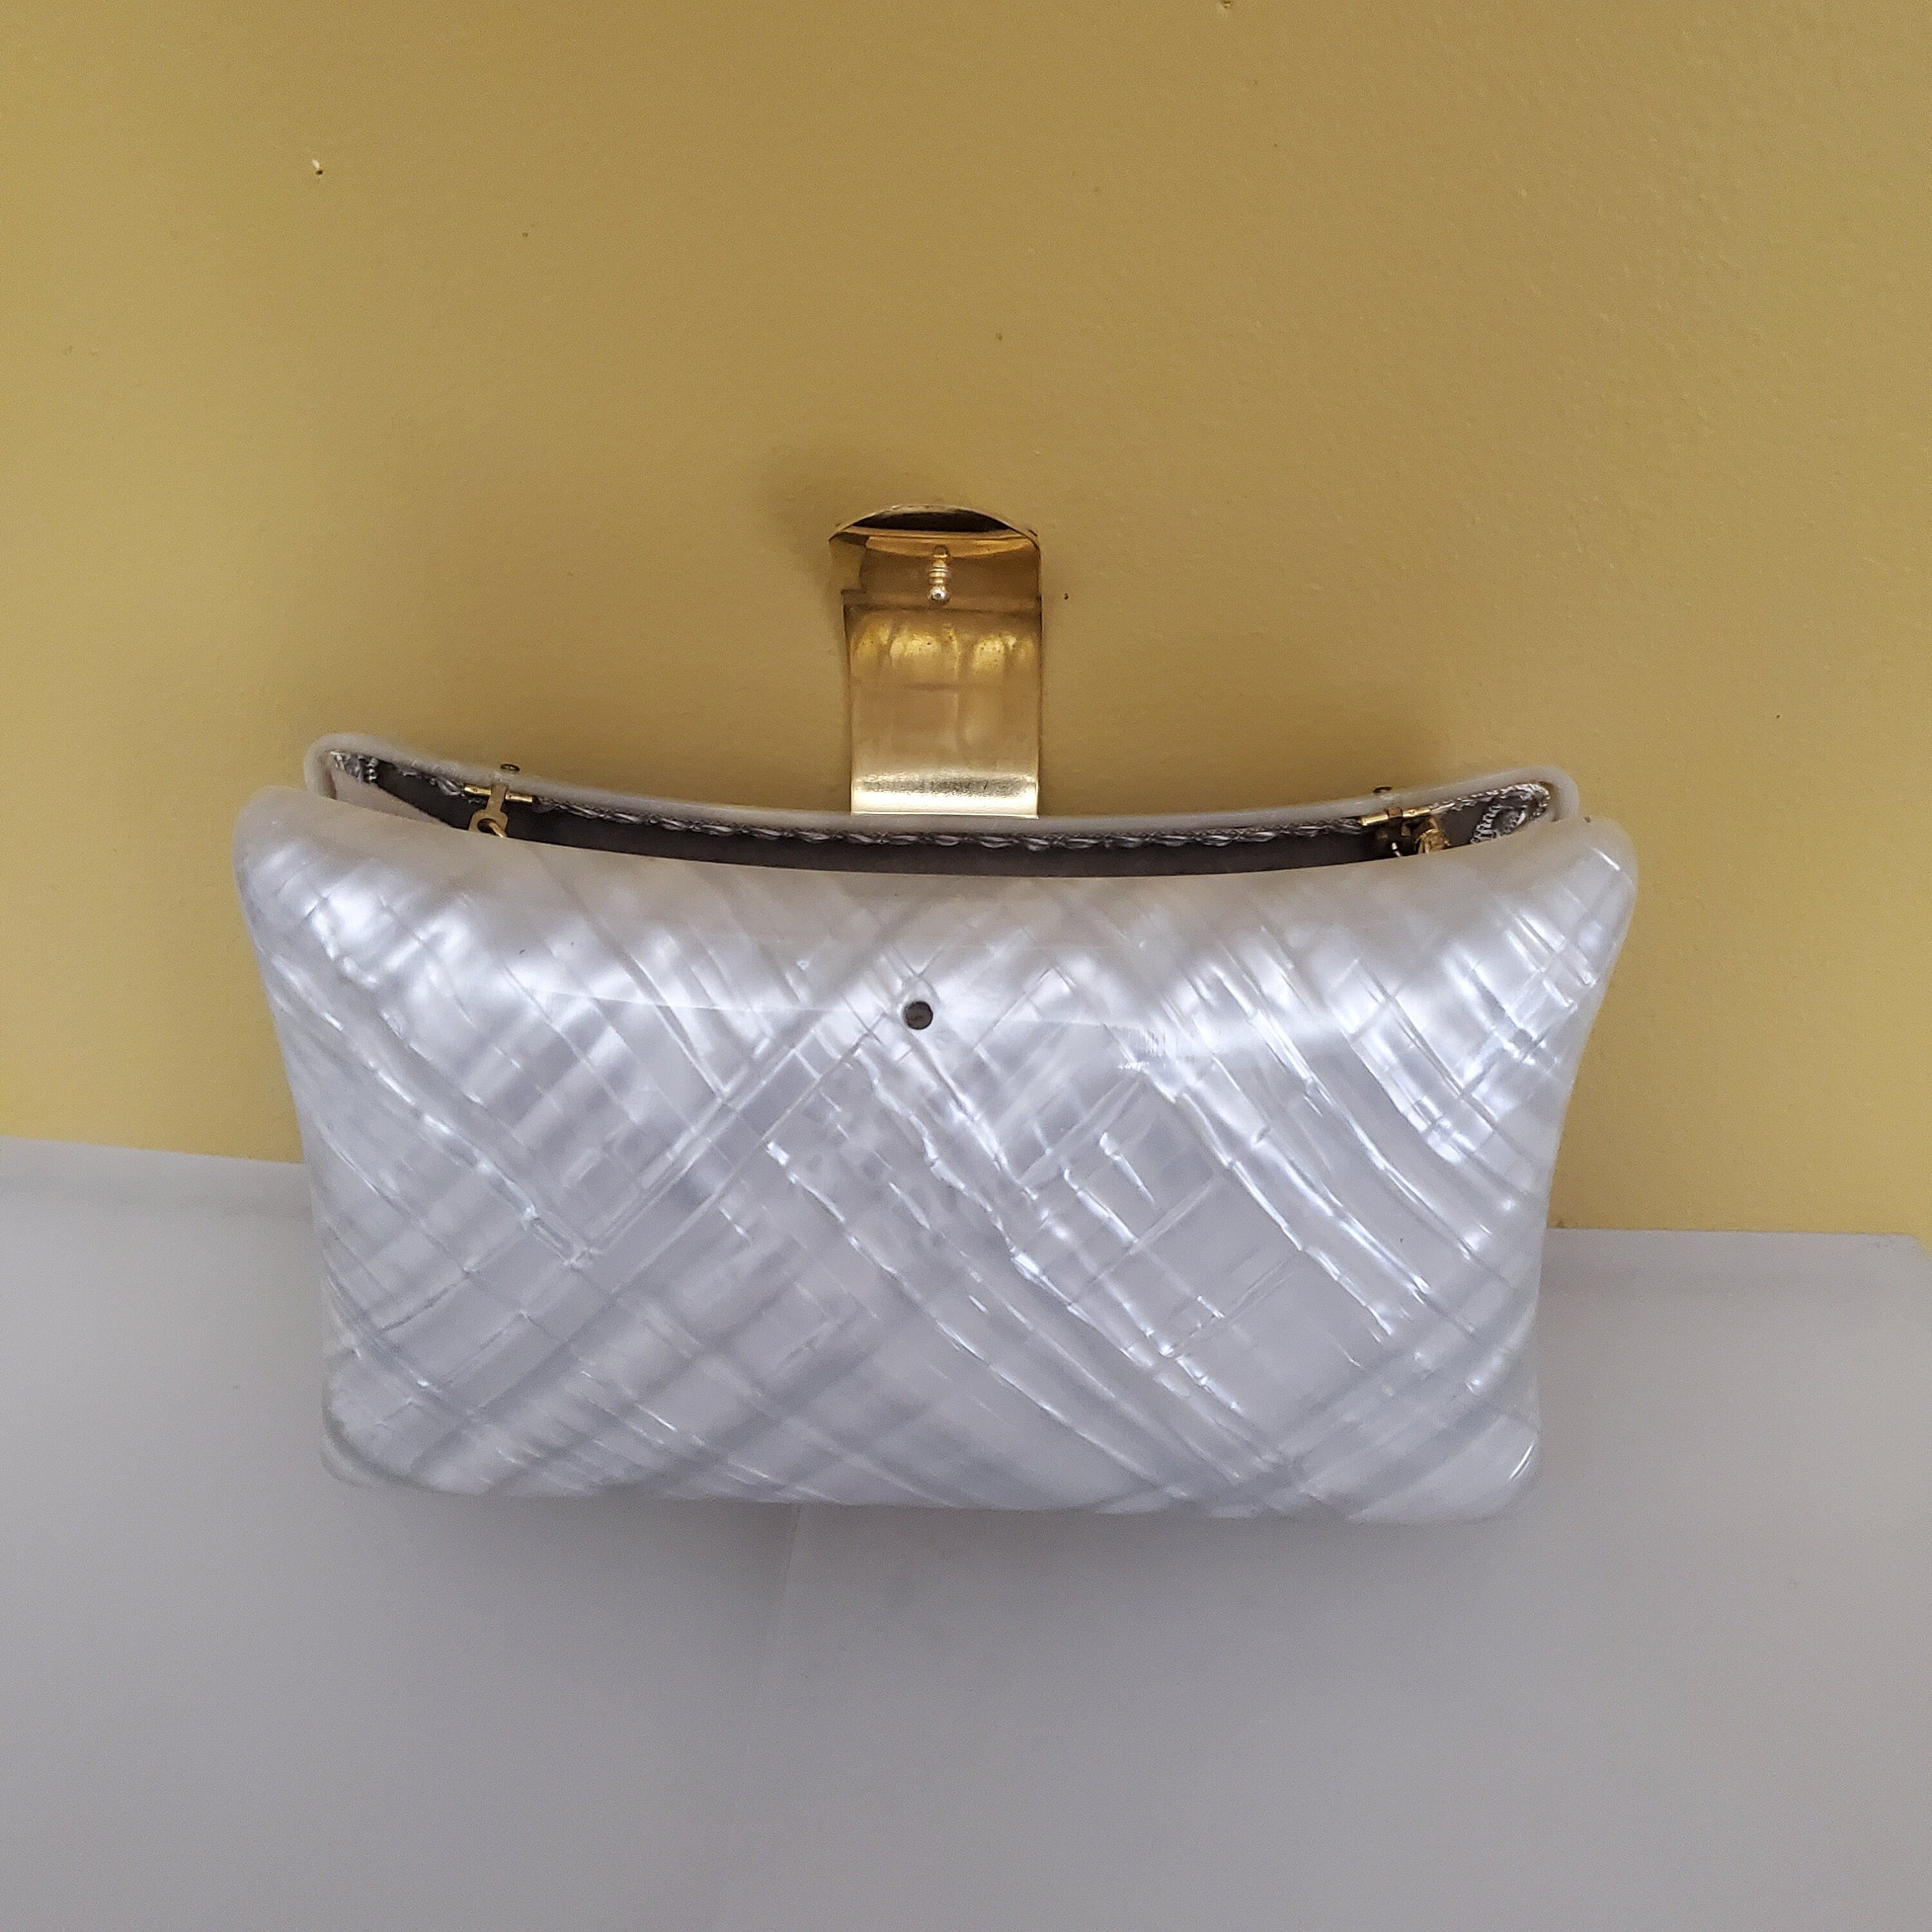 VANESSA Mother of Pearl Clam Clutch Shoulder Gold Chain Handbag Made In Italy